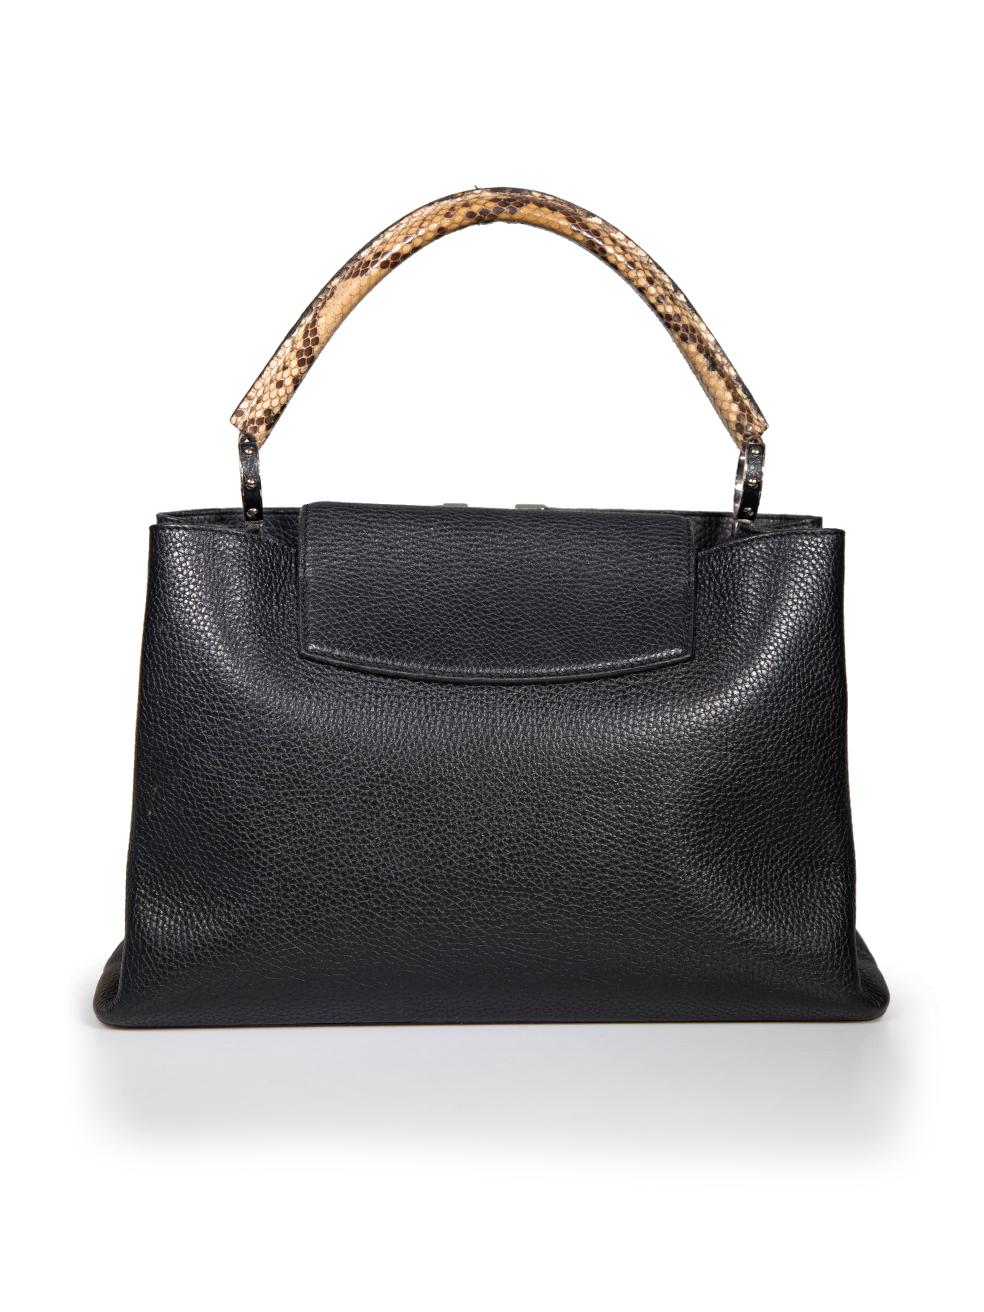 Louis Vuitton 2014 Black Leather Taurillon Python Capucines MM In Good Condition For Sale In London, GB